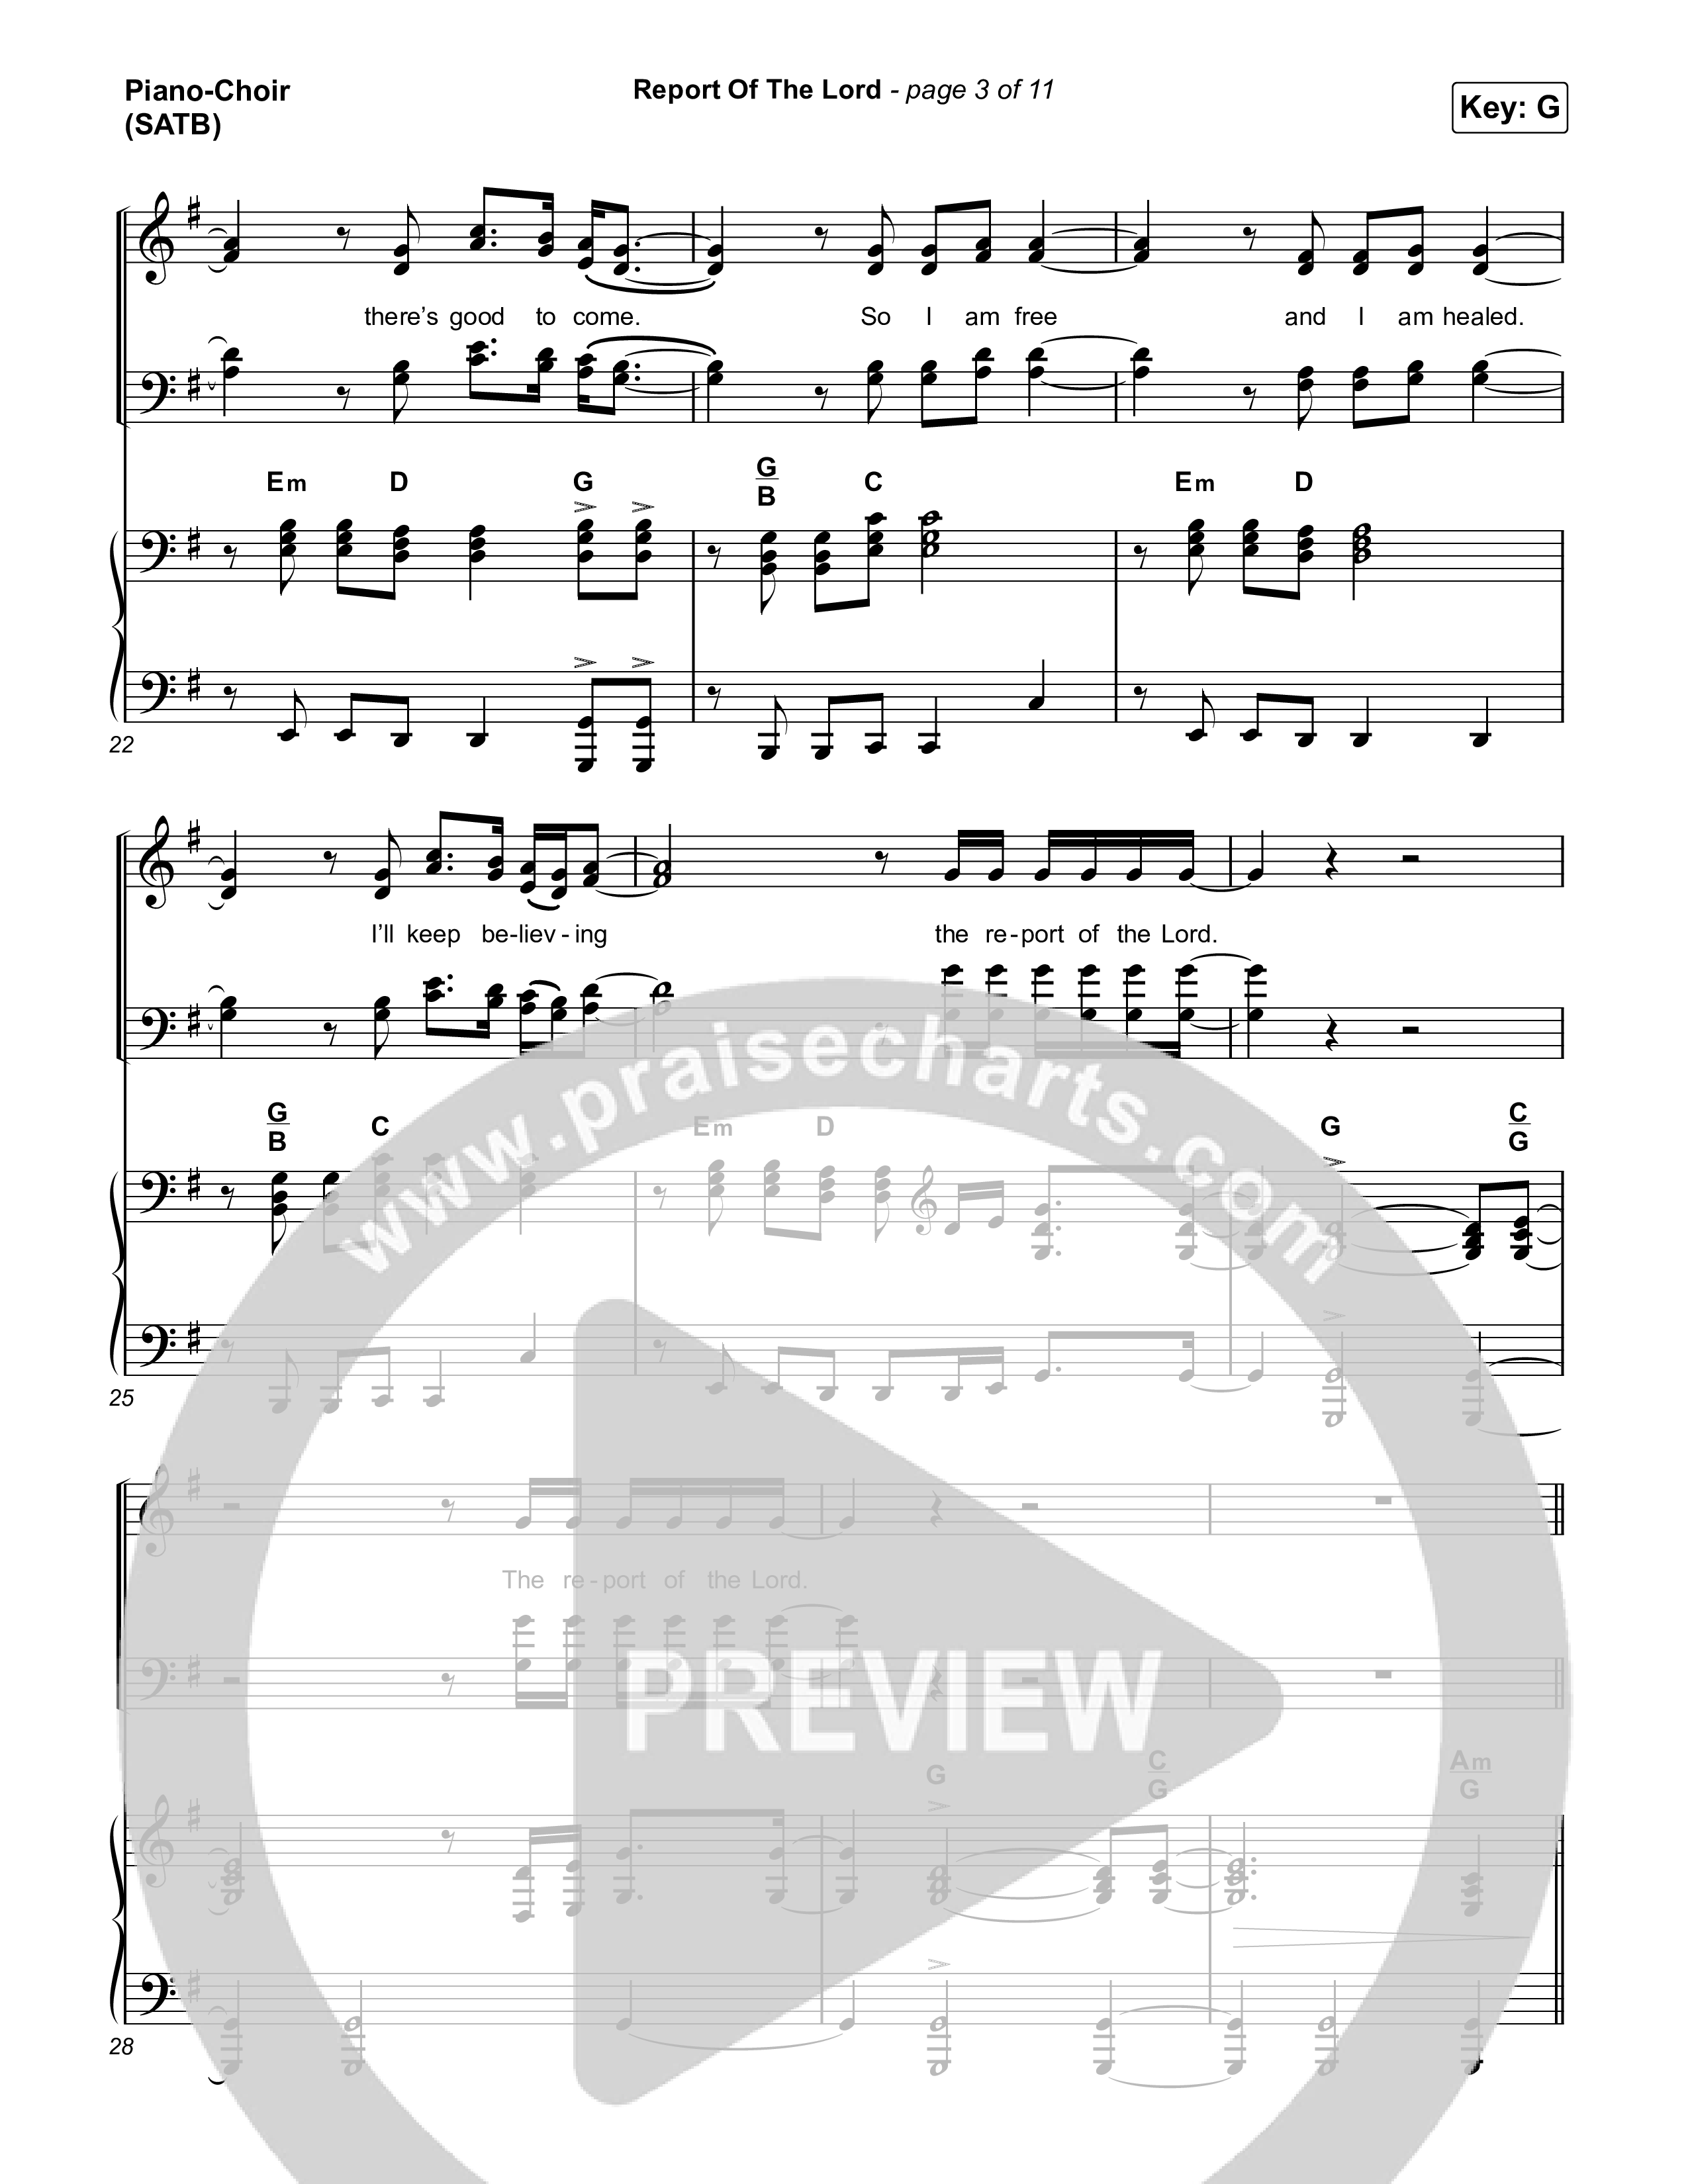 Report Of The Lord Piano/Vocal (SATB) (Charity Gayle)